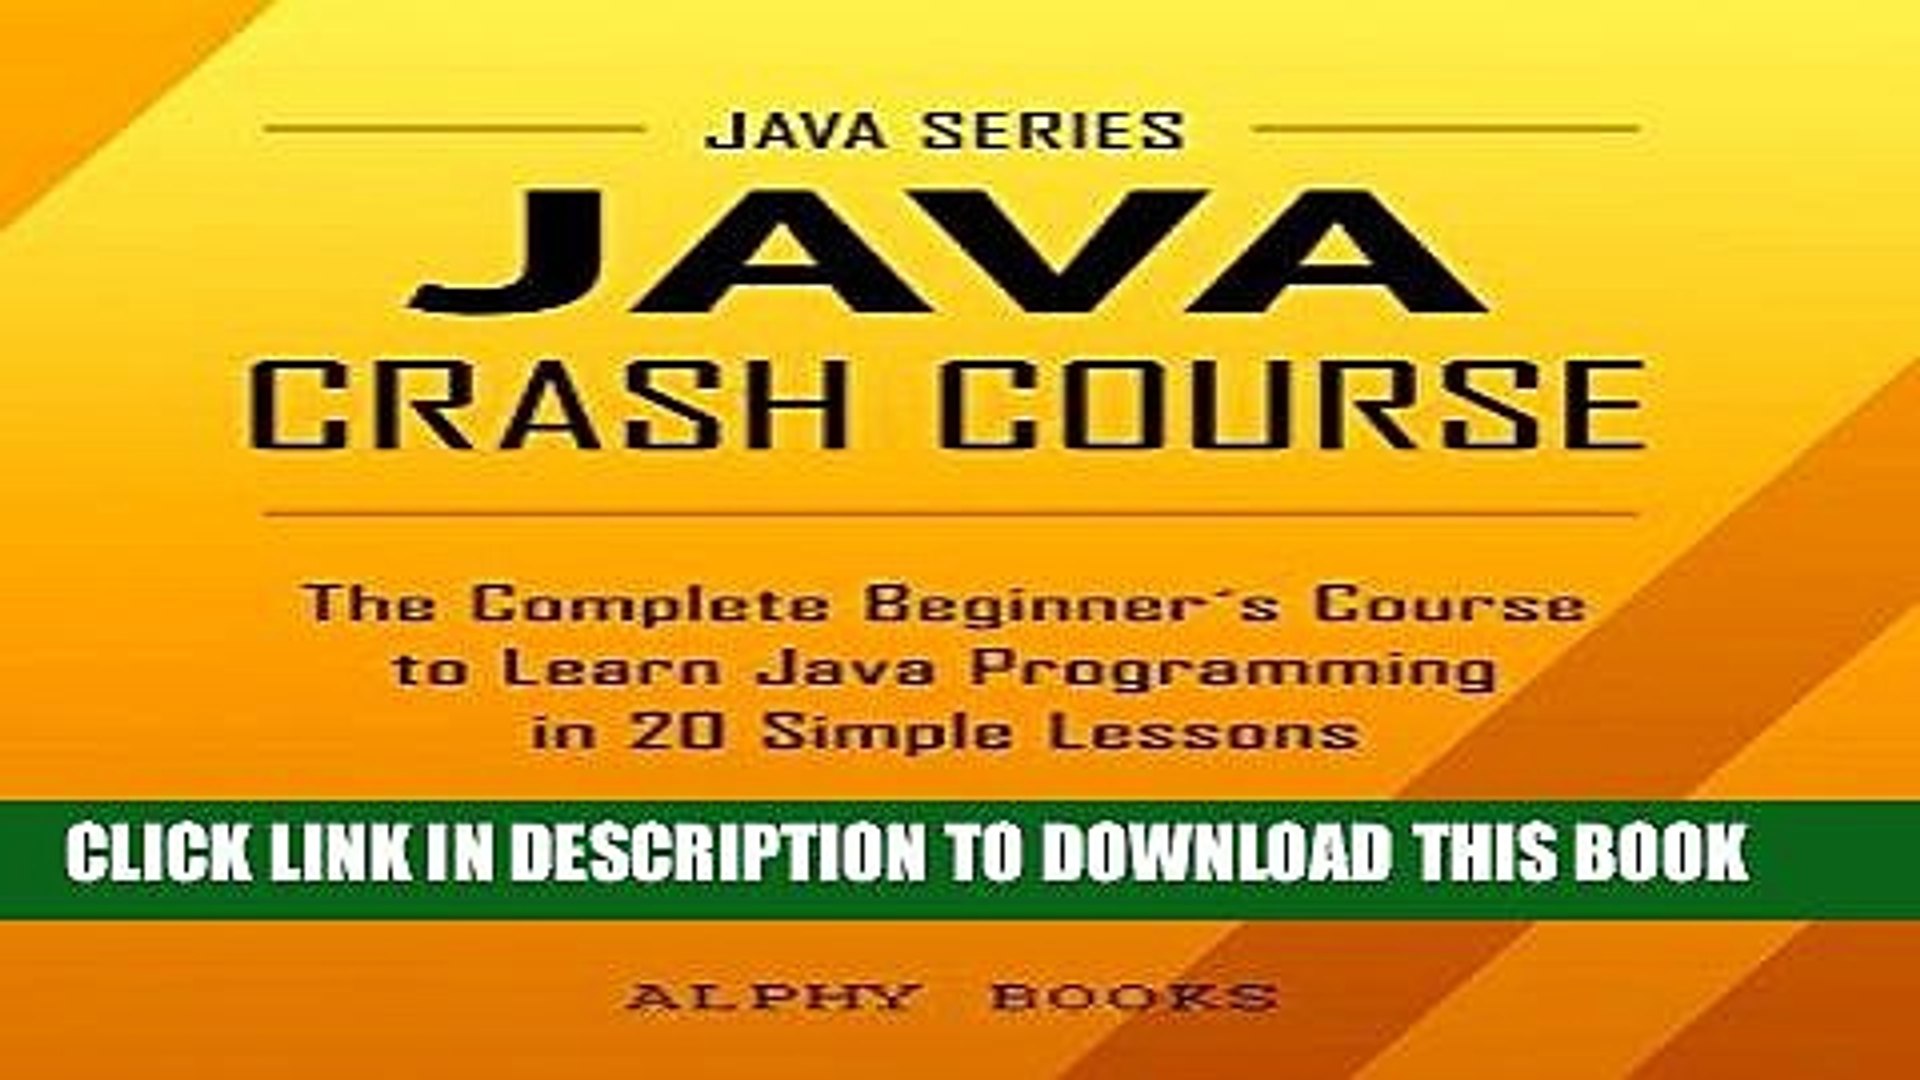 Ebook Java: Java Crash Course - The Complete Beginner s Course to Learn Java Programming in 21